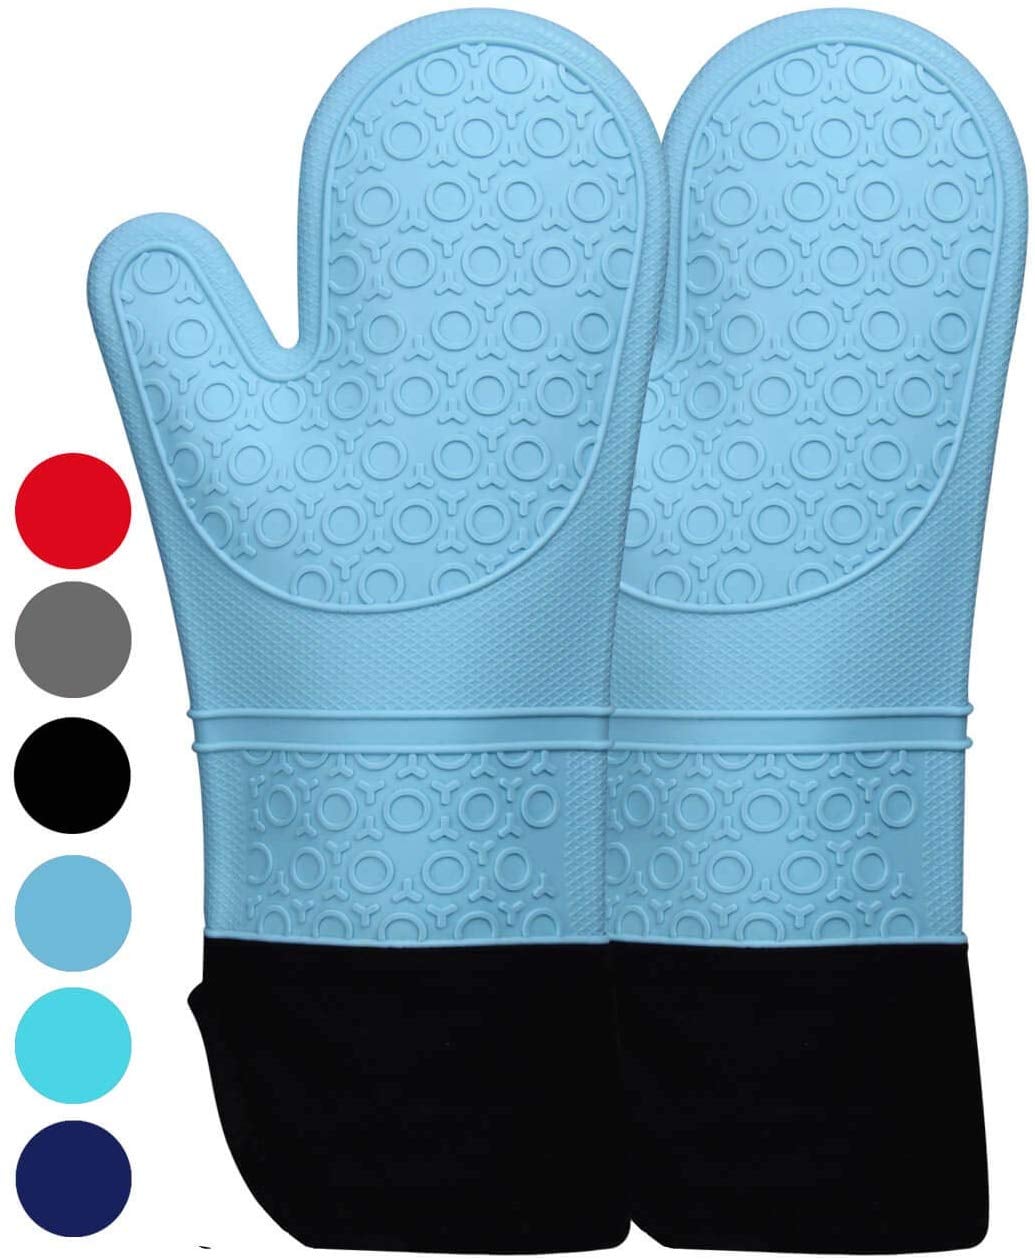 The Best-Selling Homwe Silicone Oven Mitts Are on Sale for a